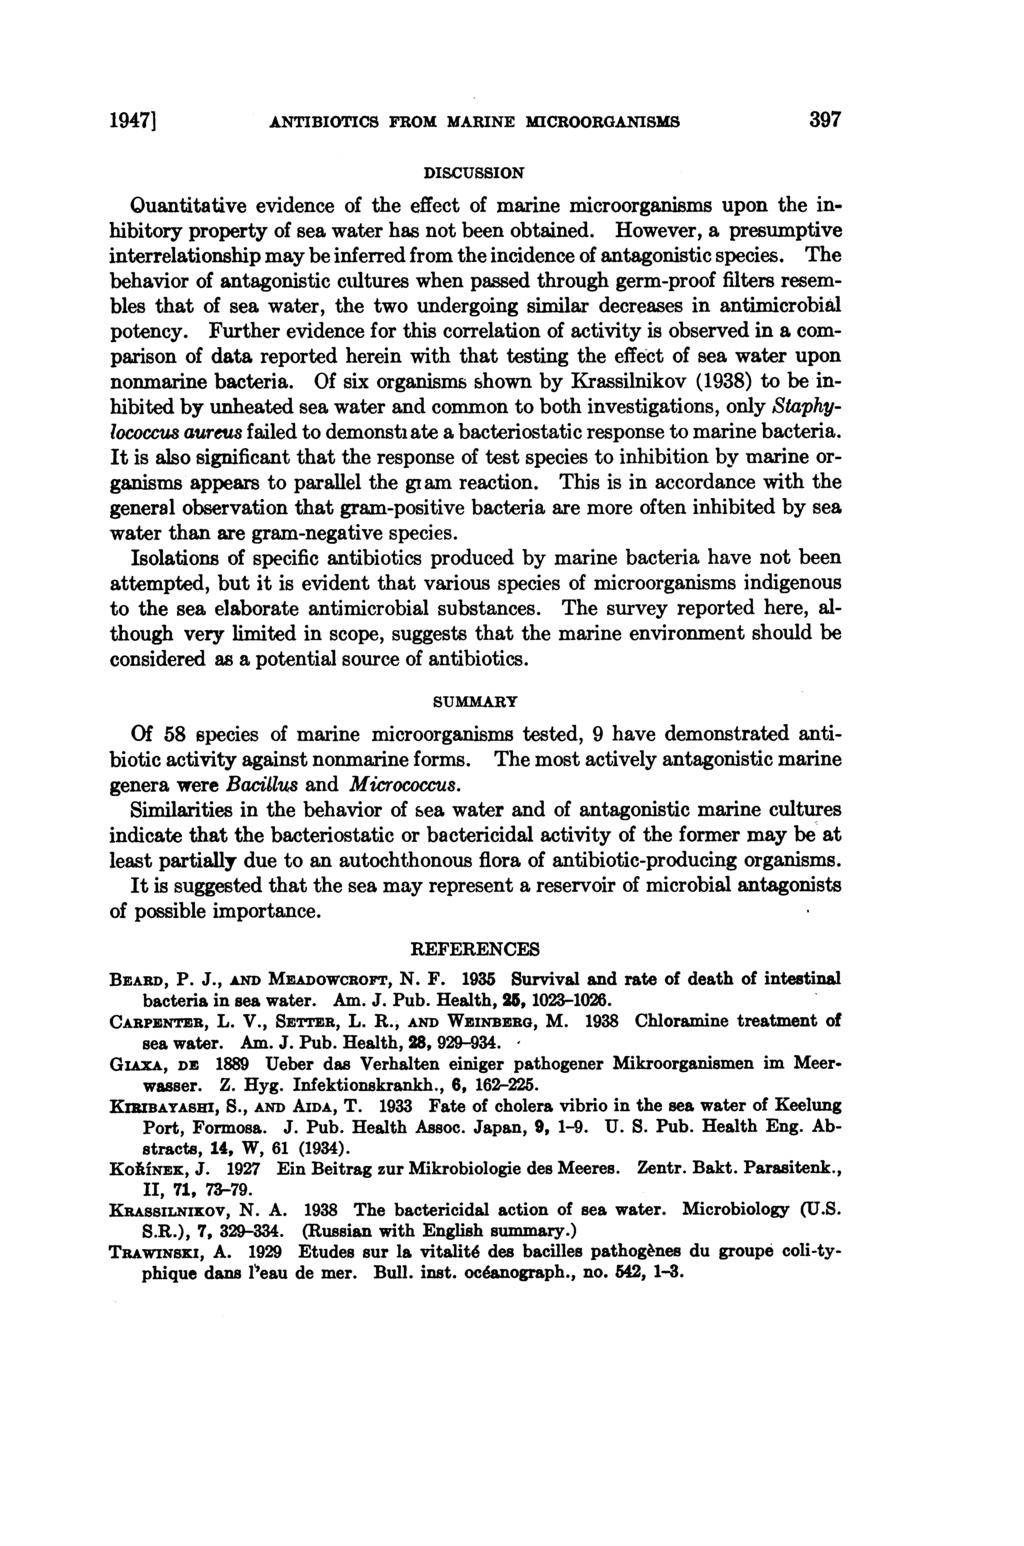 19471 1ANTIBIOTICS FROM MARINE MICROORGANISMS397 DISCUSSION Quantitative evidence of the effect of marine microorganss upon the inhibitory property of sea water has not been obtained.